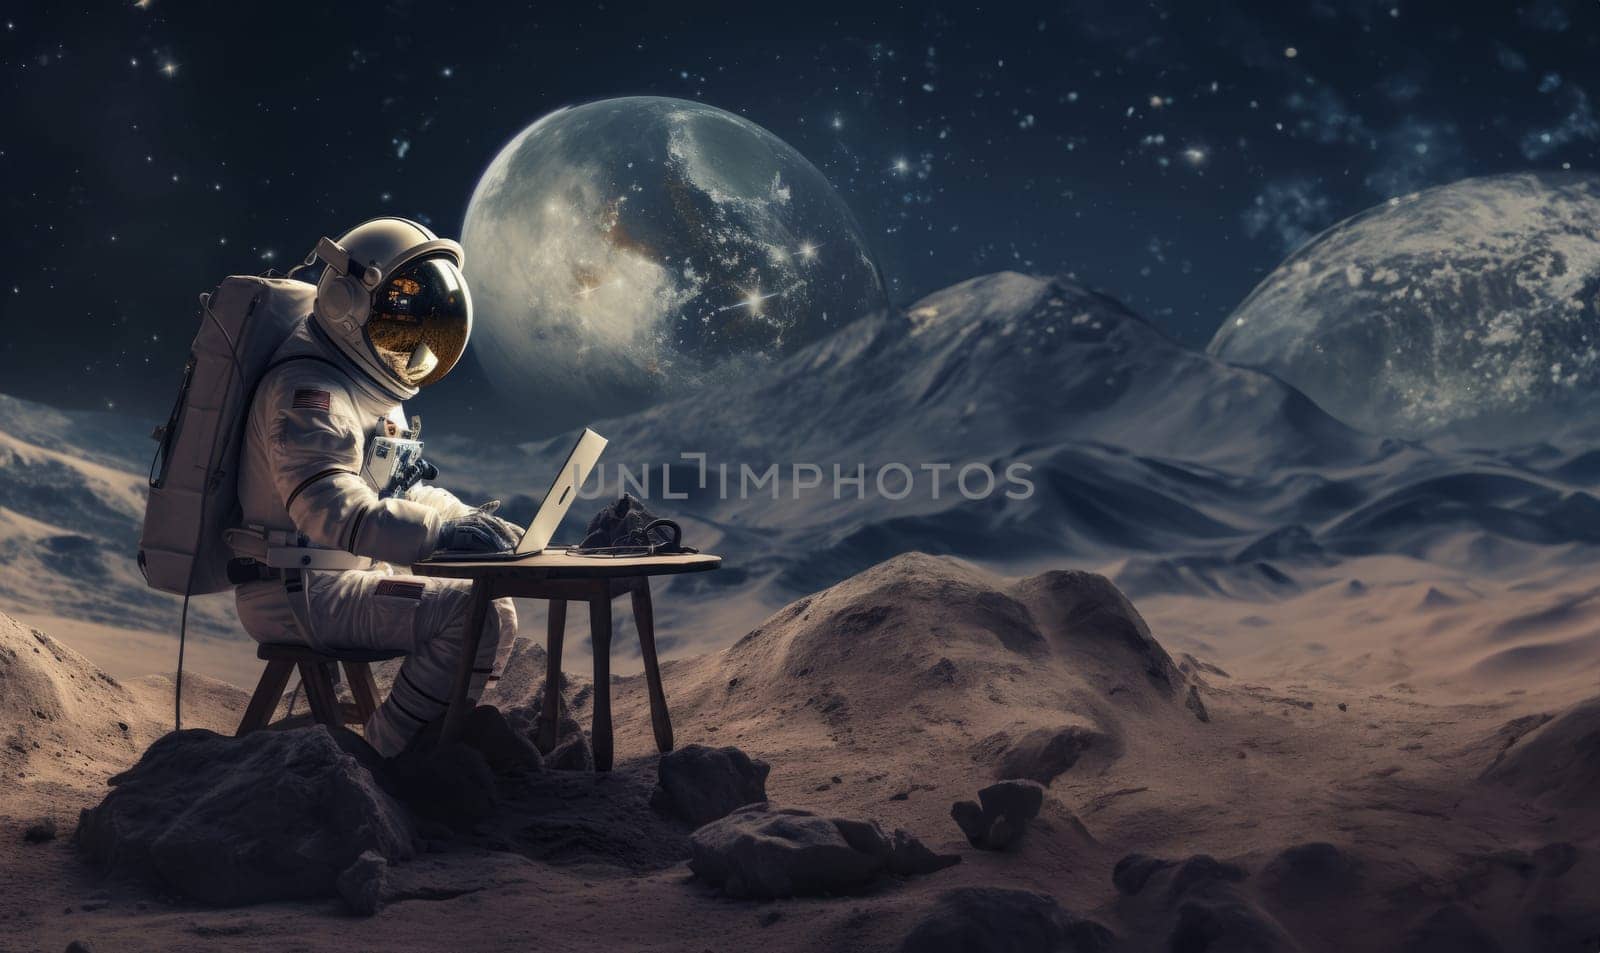 An astronaut utilizes a computer on Mars during the serene Martian night, with the moon visible in the cosmic sky, symbolizing the ongoing exploration of the Red Planet.Generated image by dotshock